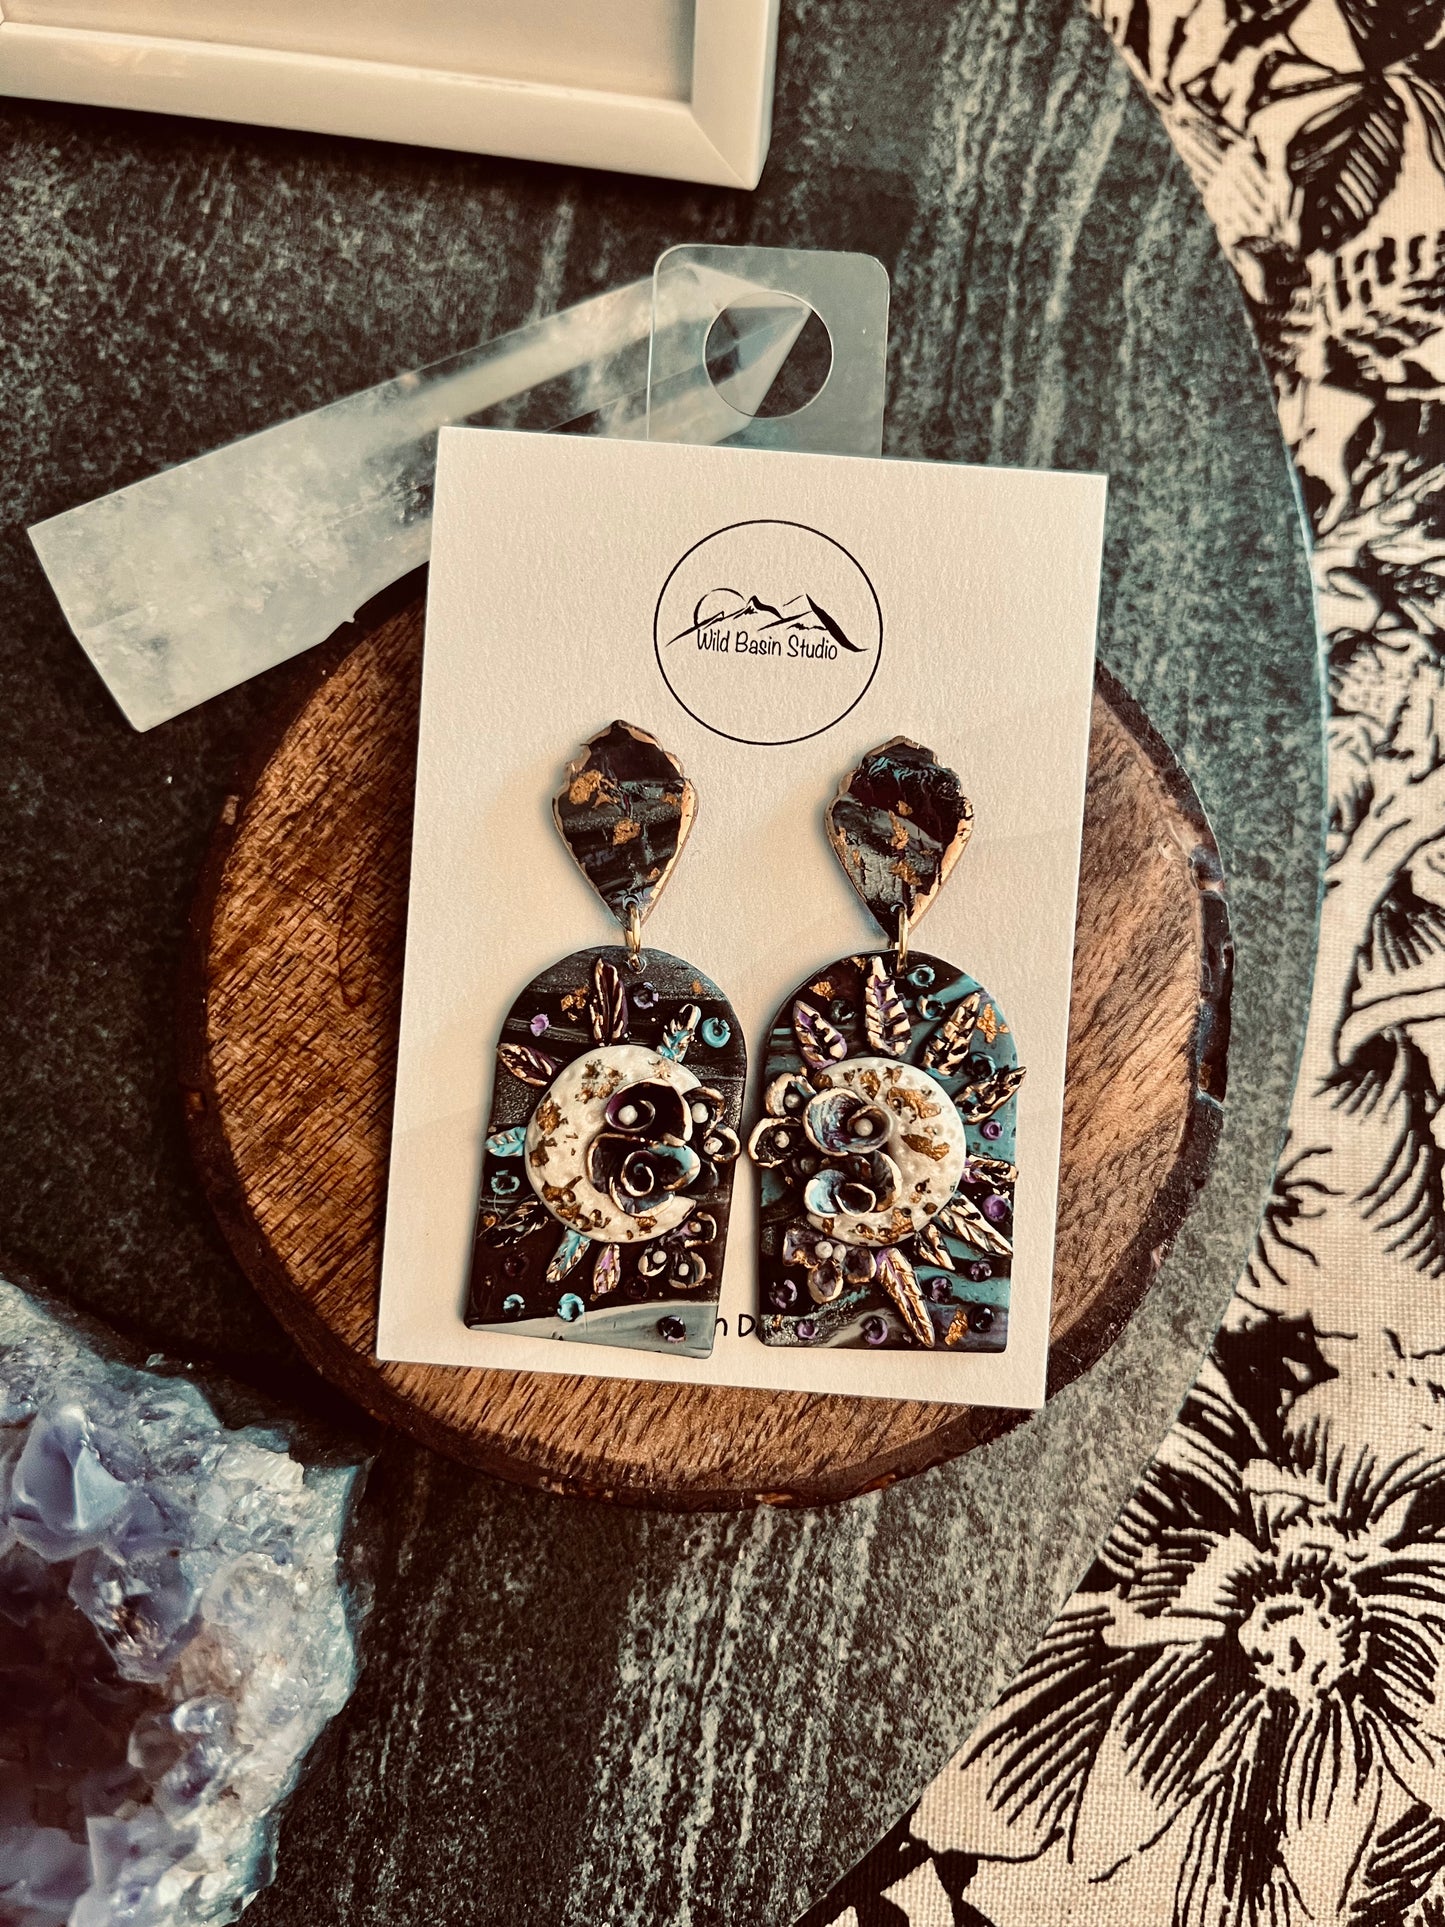 Celebrate the Flower Moon with these handcrafted earrings. Made with kato polymer clay, each intricate floral design symbolizes new growth and blooming. Nickel-free and hypoallergenic posts ensure comfort and style.